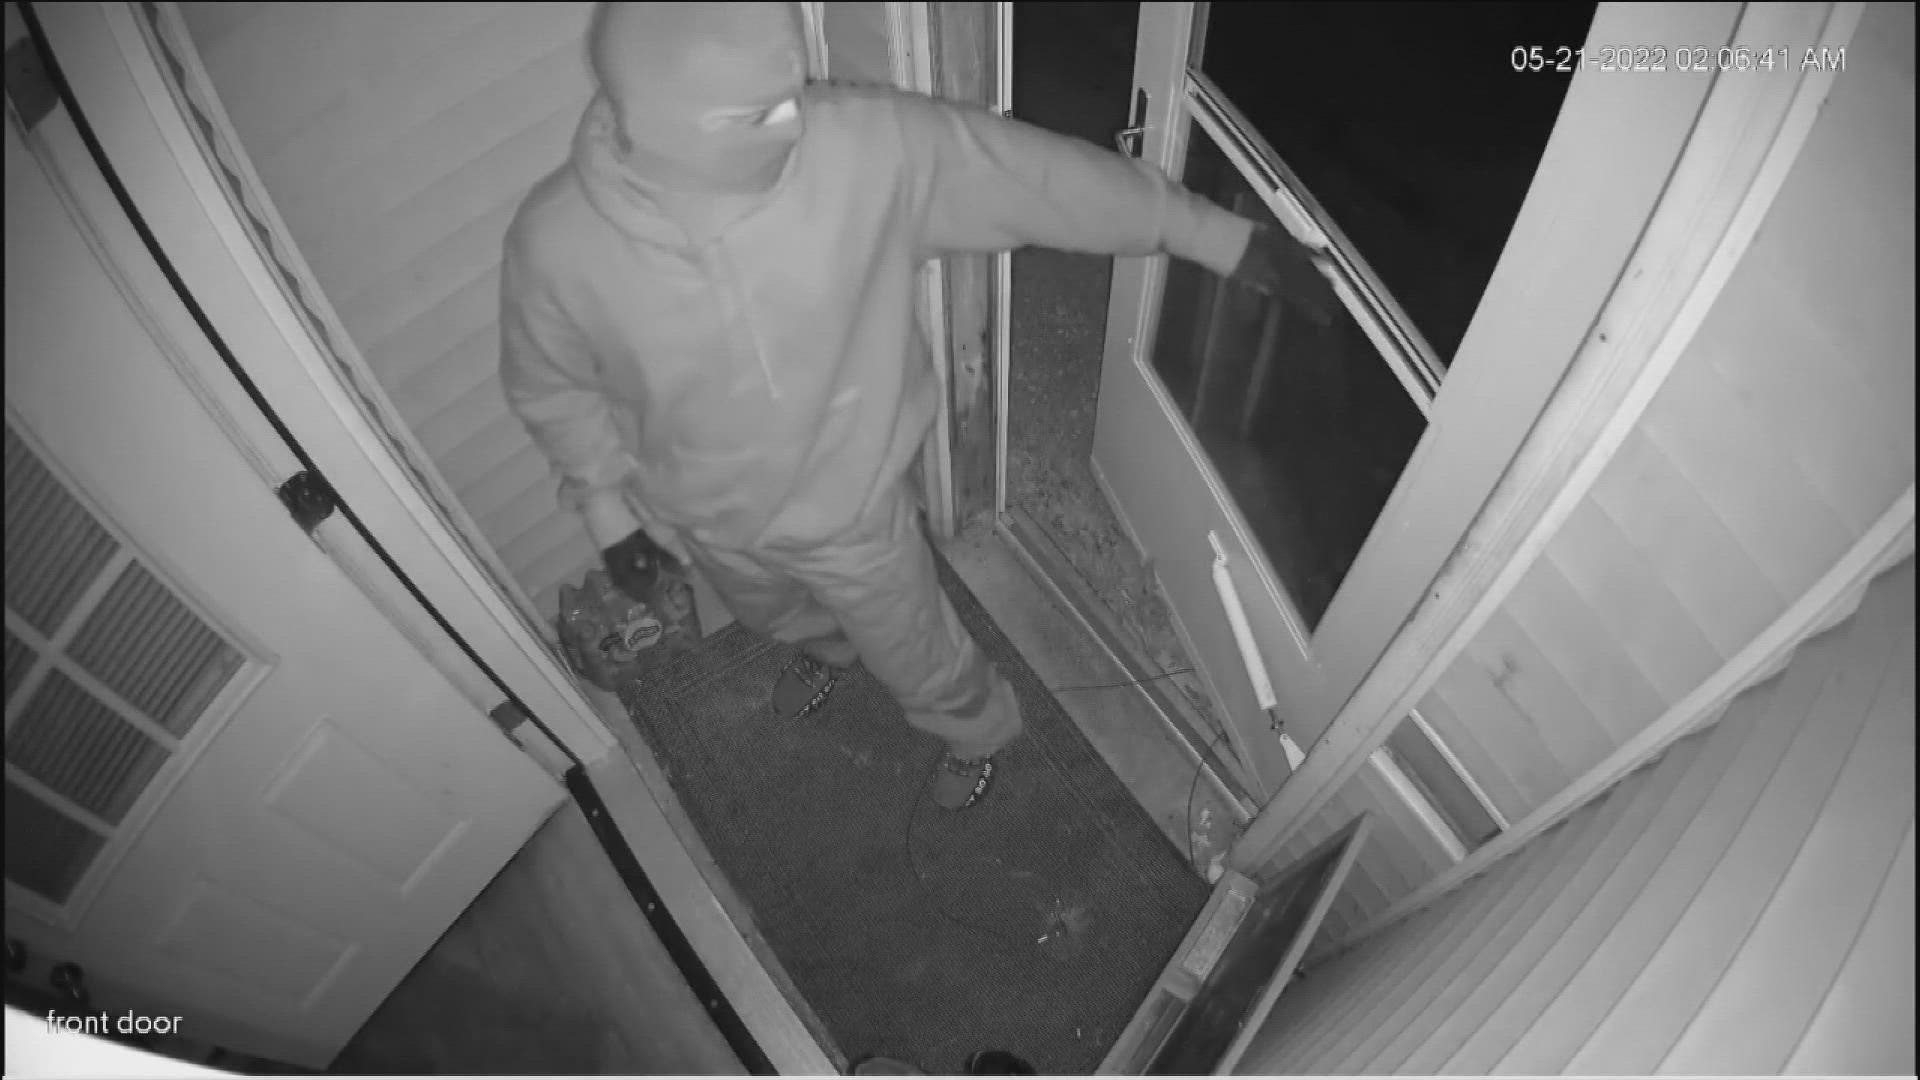 Video shows armed suspects in masks and gloves burglarizing a west Toledo home.